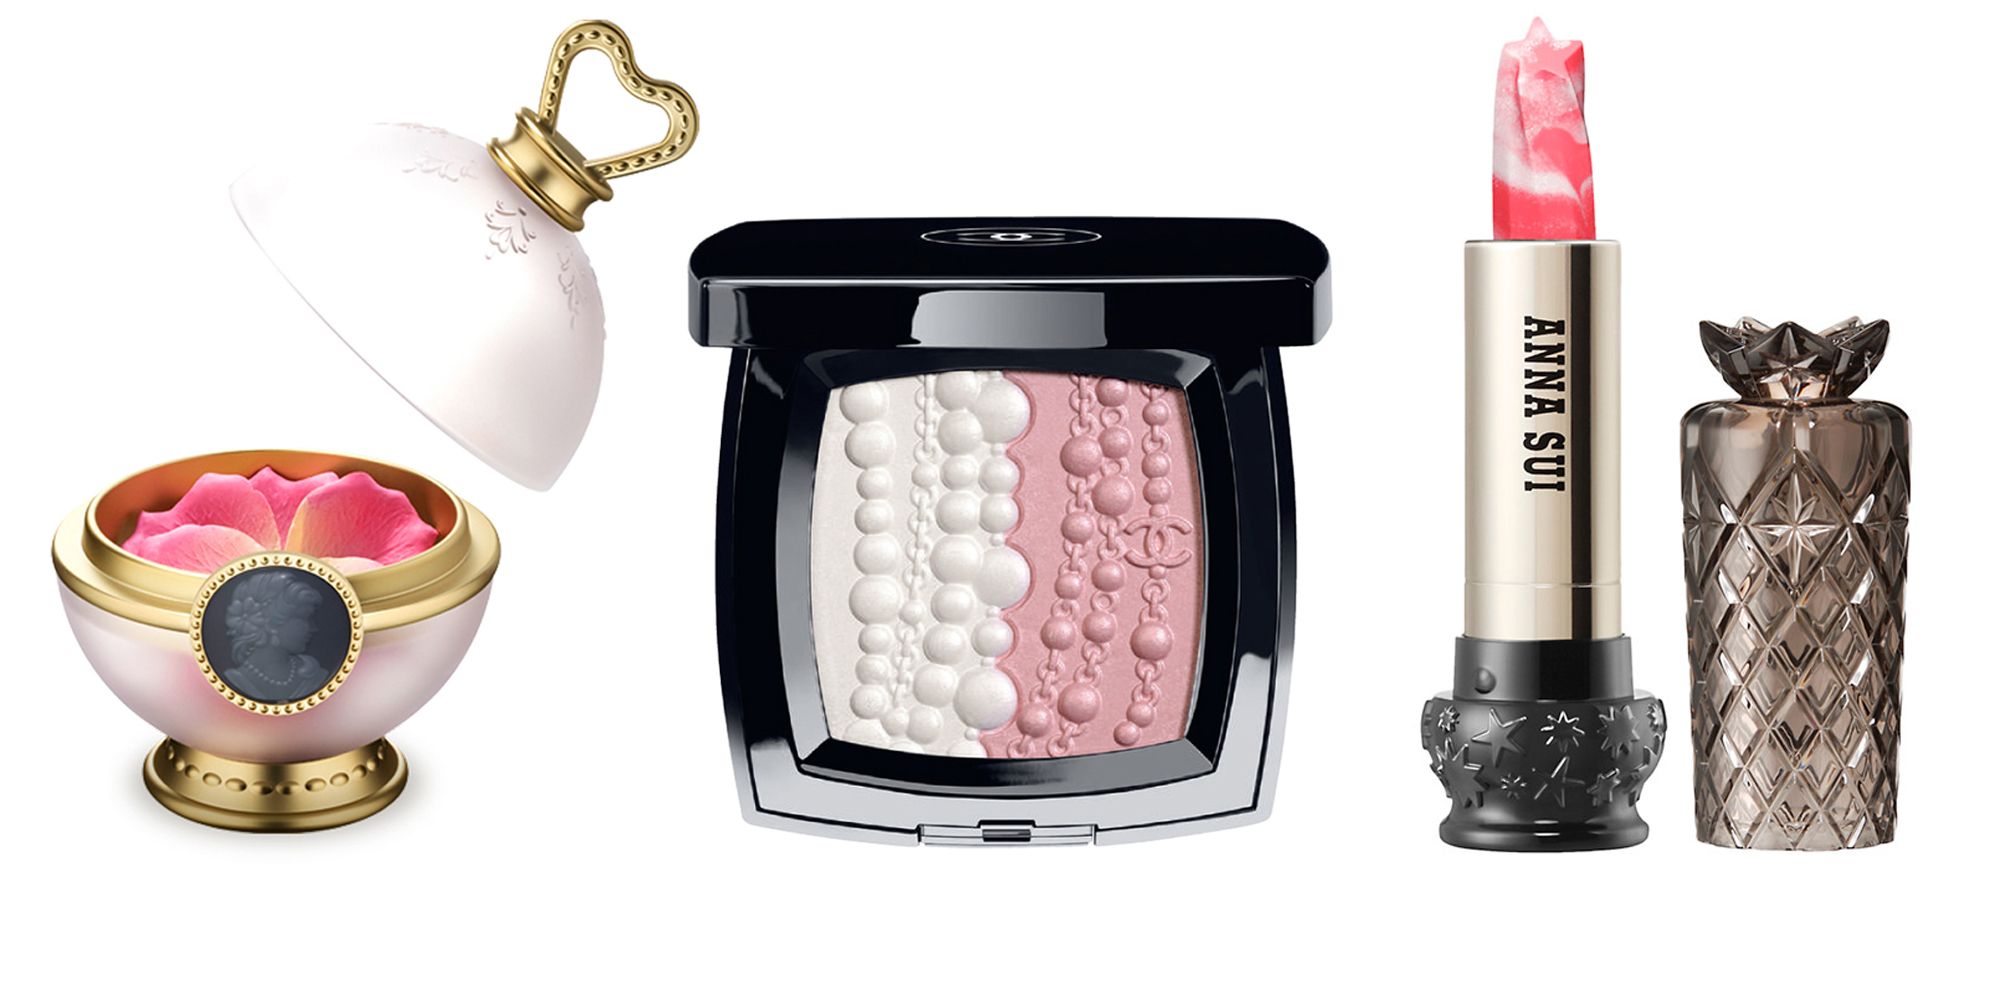 Beauty Products That Are Too Pretty to Use - Prettiest Beauty Products